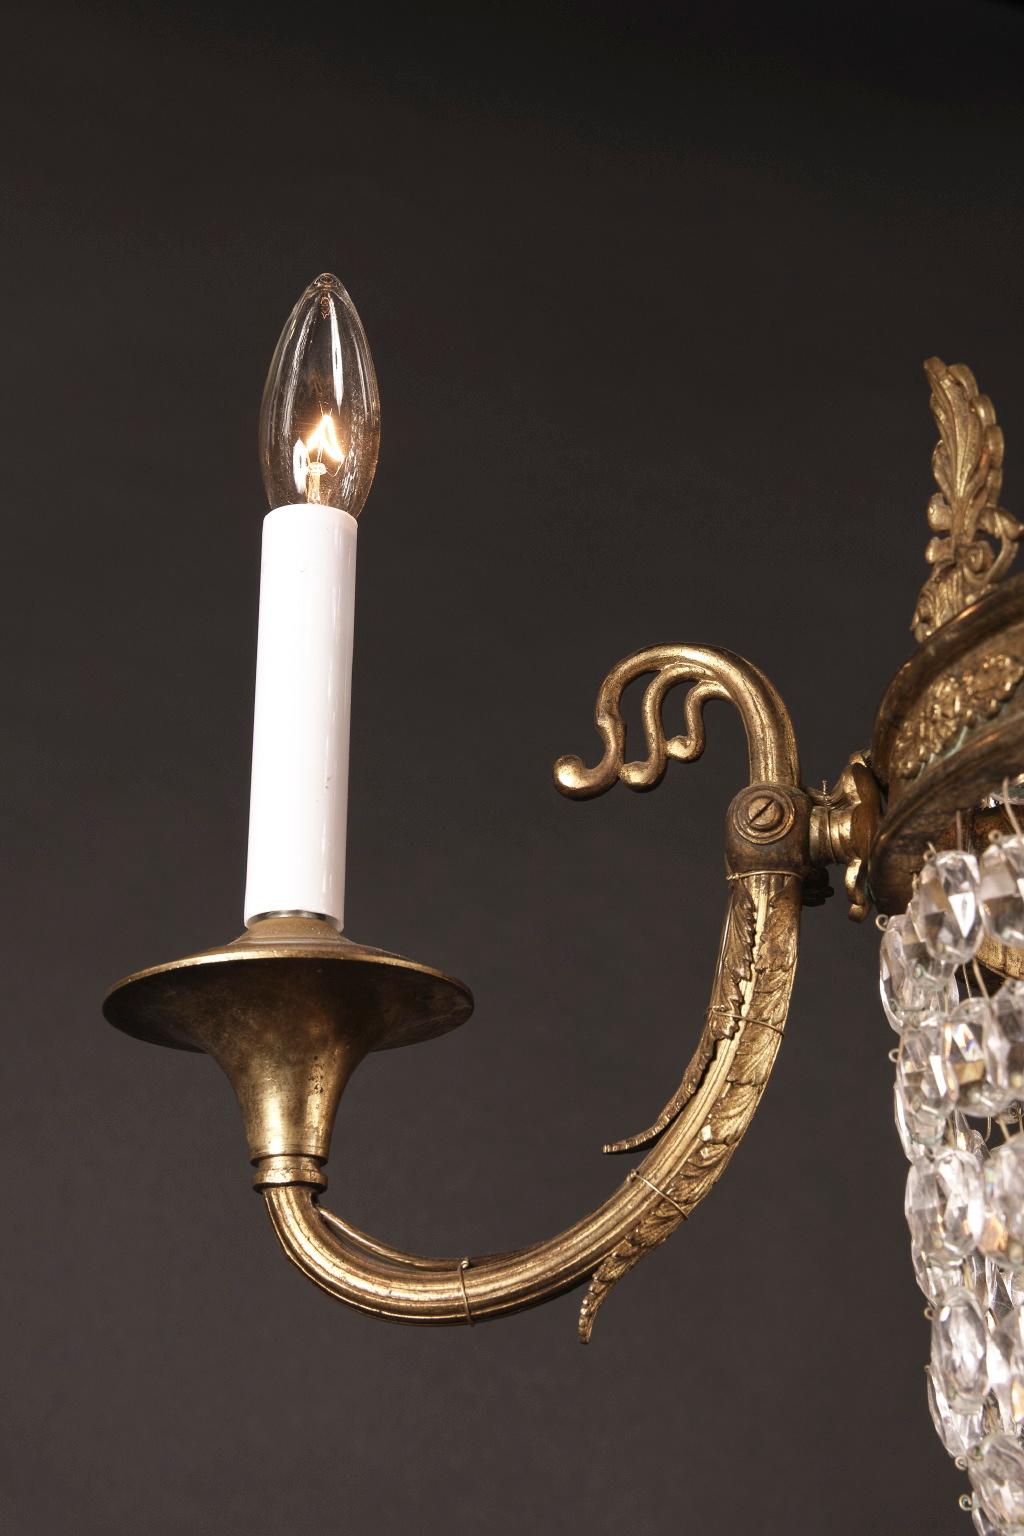 Small late 19th century French bronze and crystal 3 This small Empire chandelier is made of bronze and draped with oval cut crystal beads. The French antique piece dates back to the late 19th century. The crown at top is adorned with large palmetto